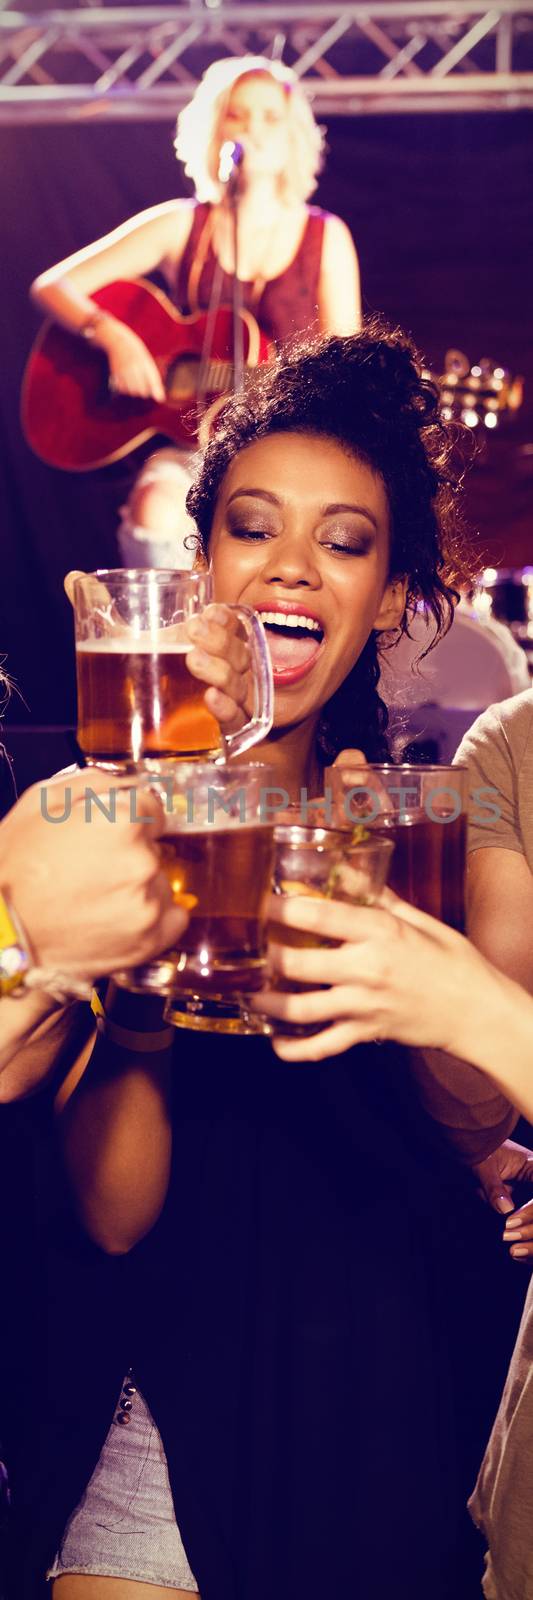 Smiling friends toasting beer glasses with performer singing in background at nightclub